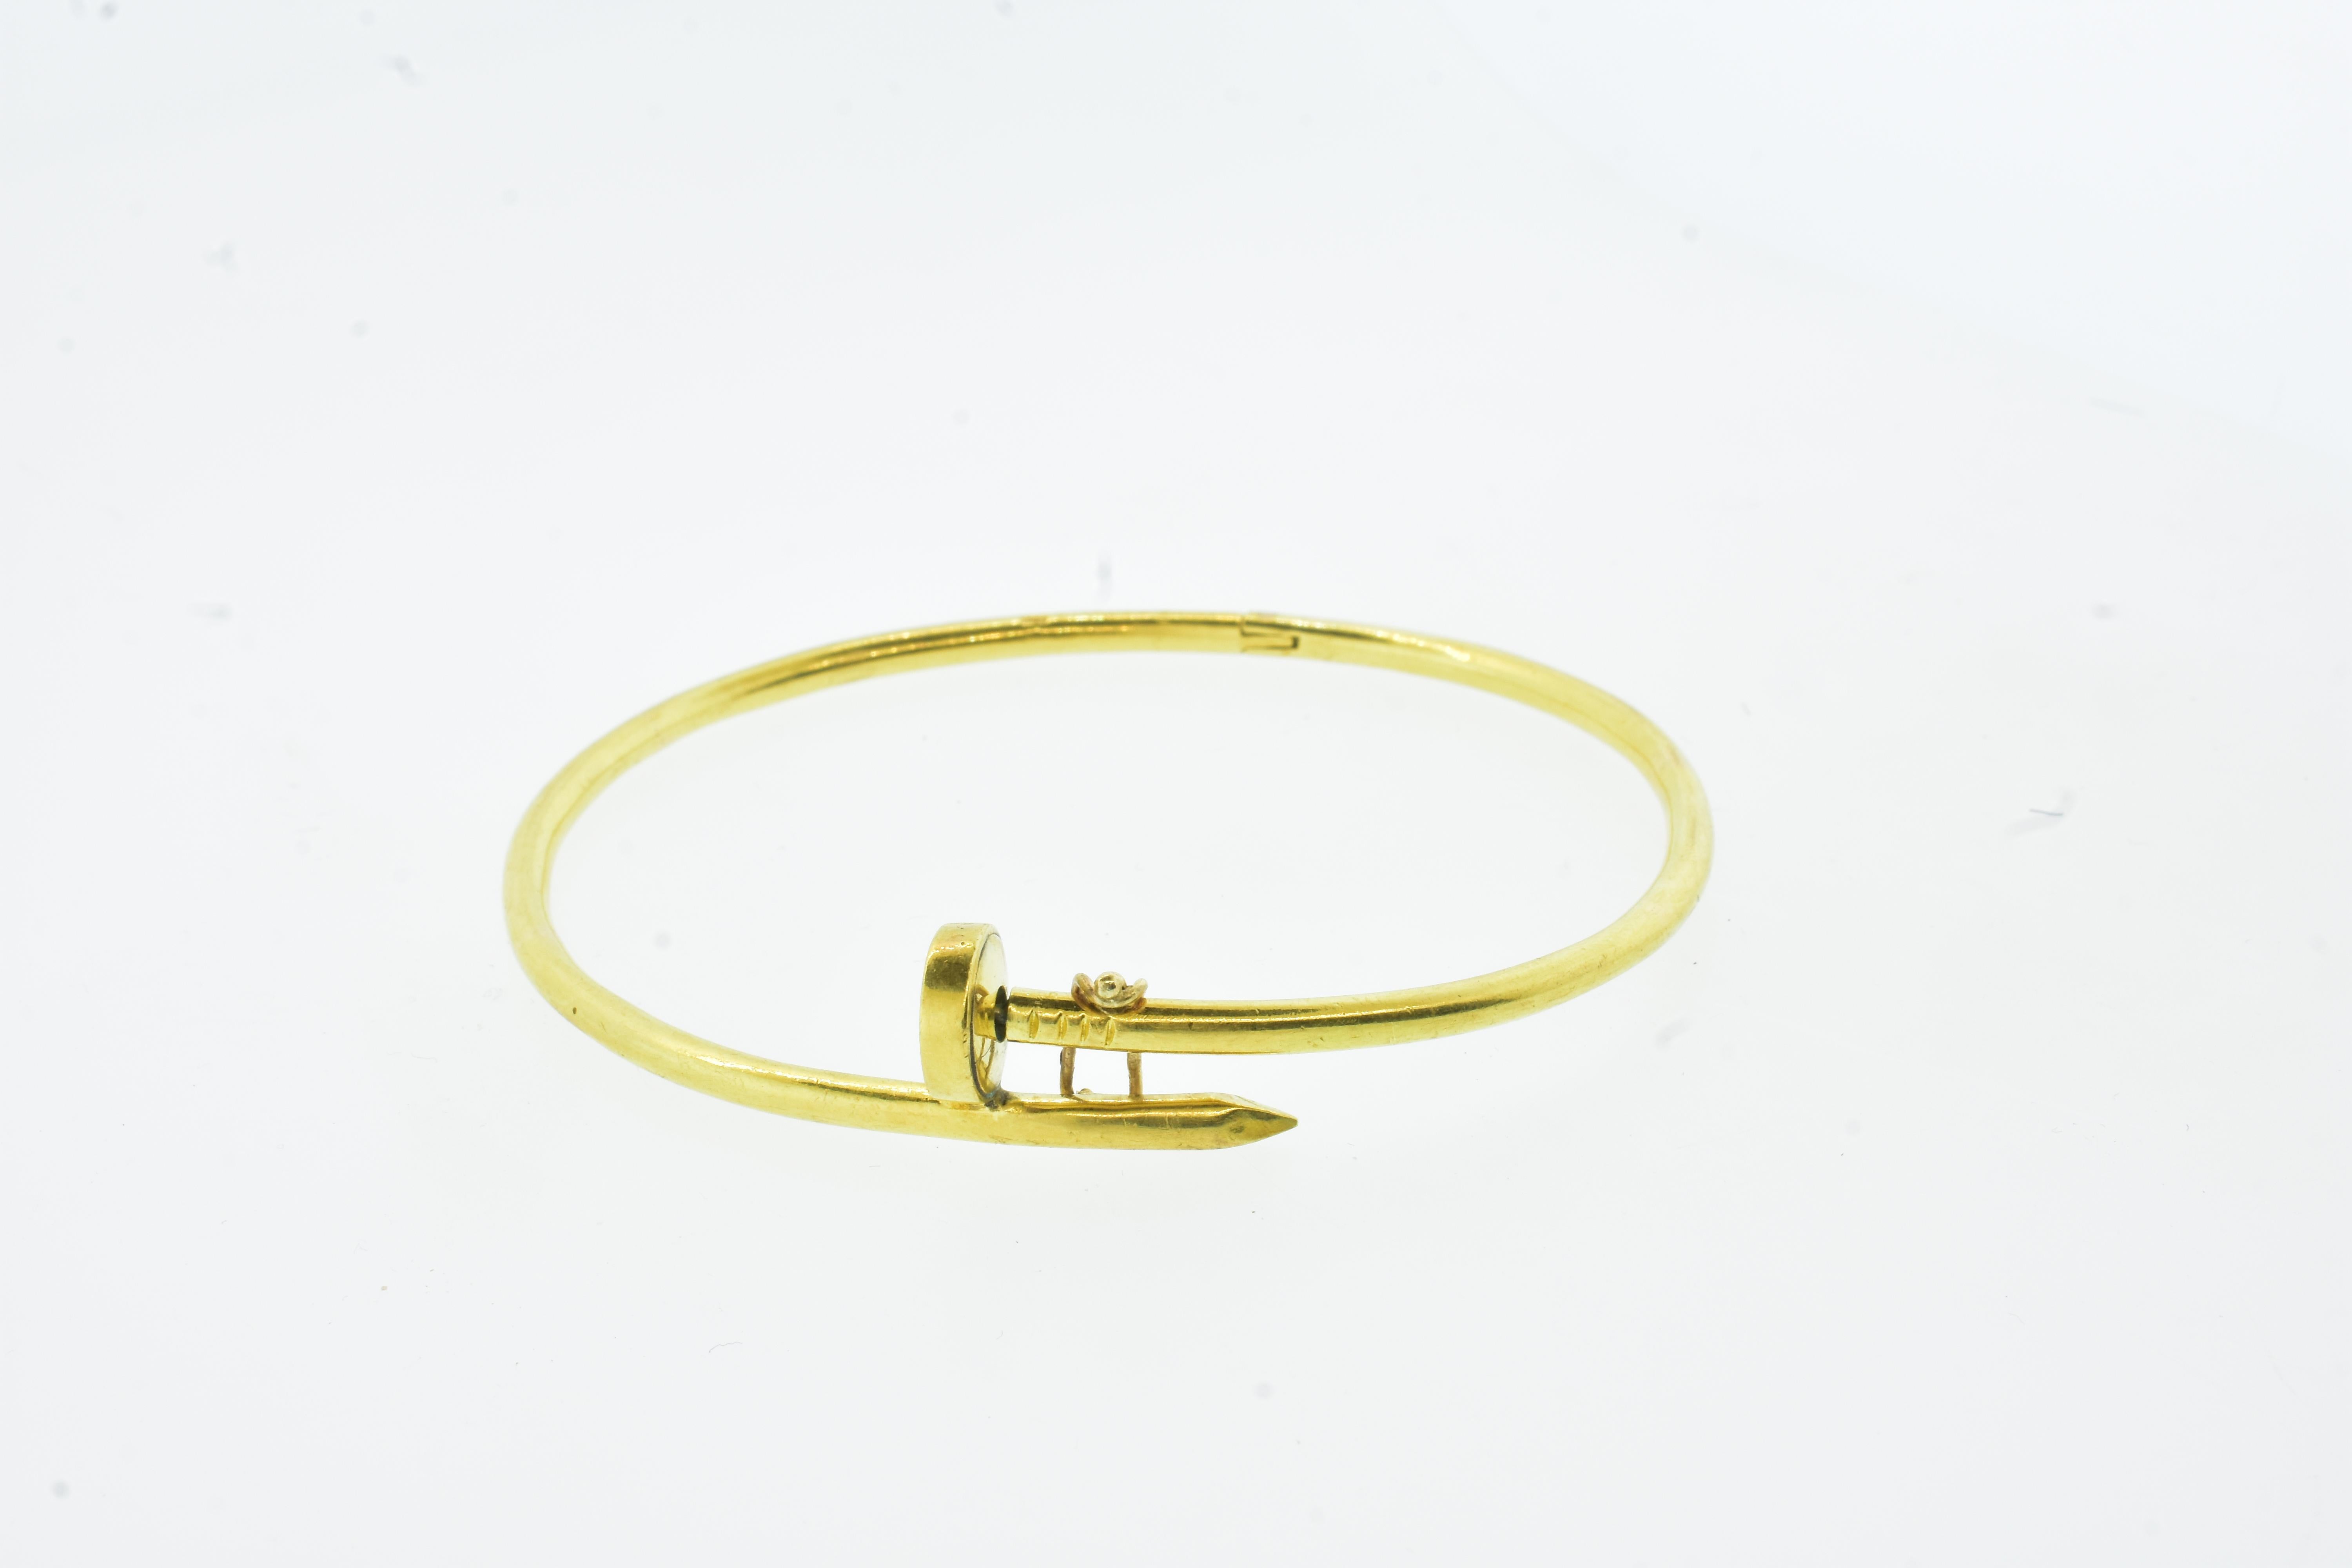 
This bracelet was made the same year that Aldo Cipullo release, over 50 years ago,  this - his newest design for Cartier. Early Juste un Clou bracelets by Aldo Cipullo are quite rare. Ours is engraved Aldo Cipullo, 1971.  The 18K yellow gold